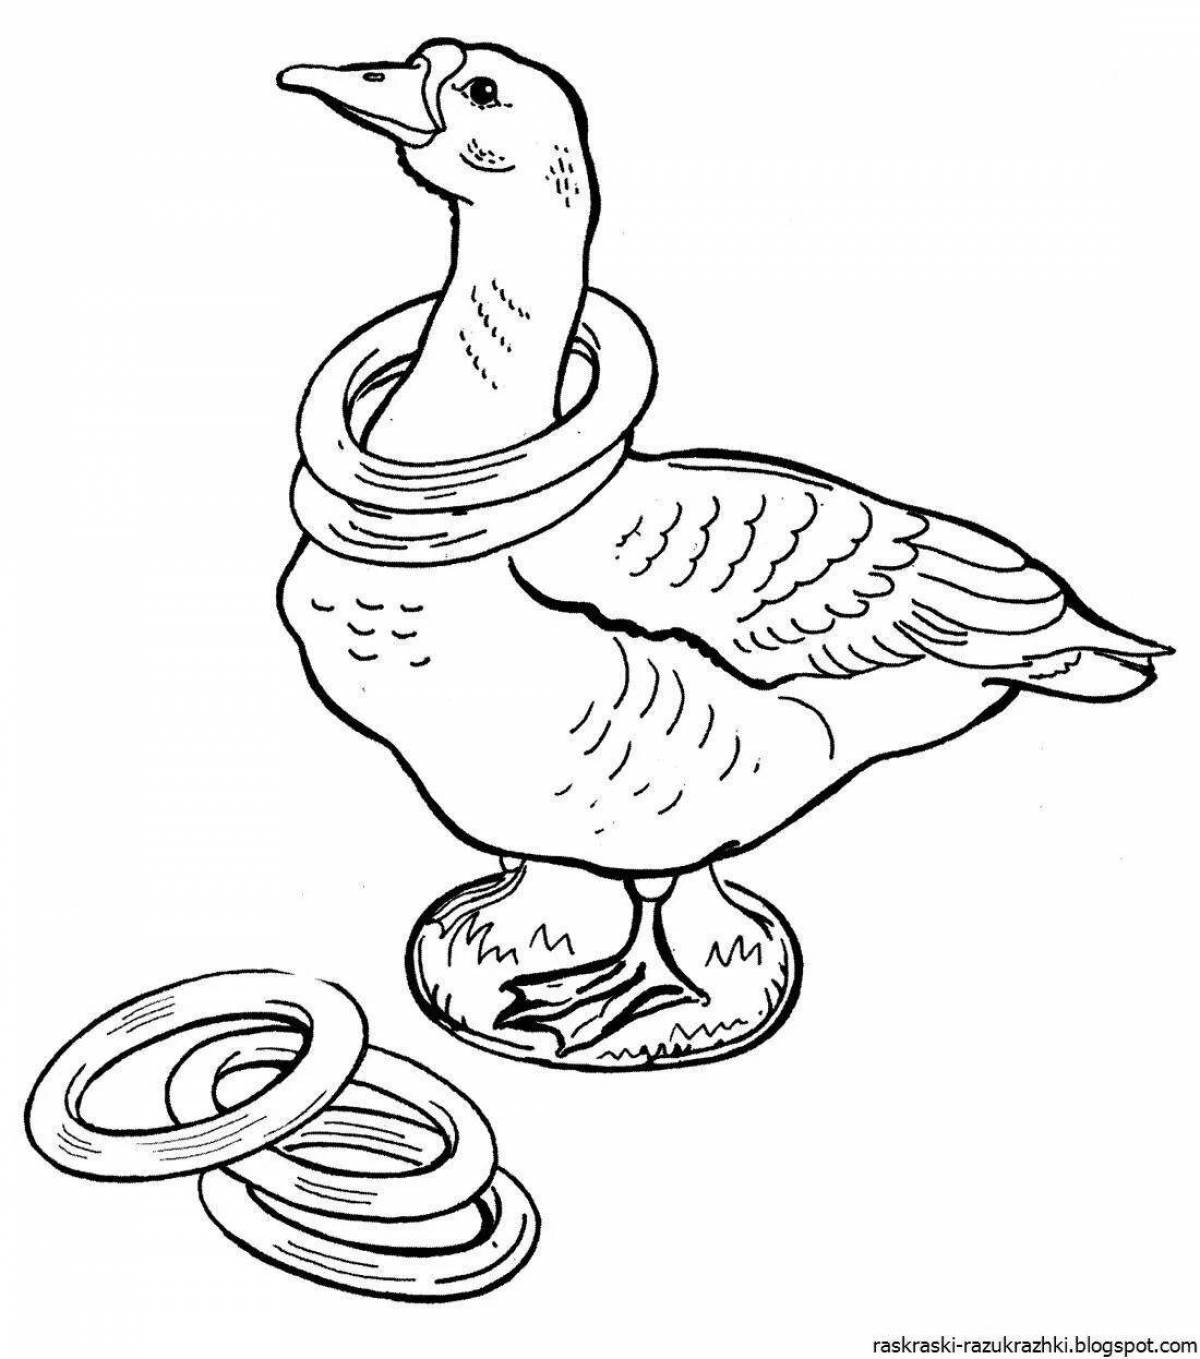 Creative goose coloring for kids